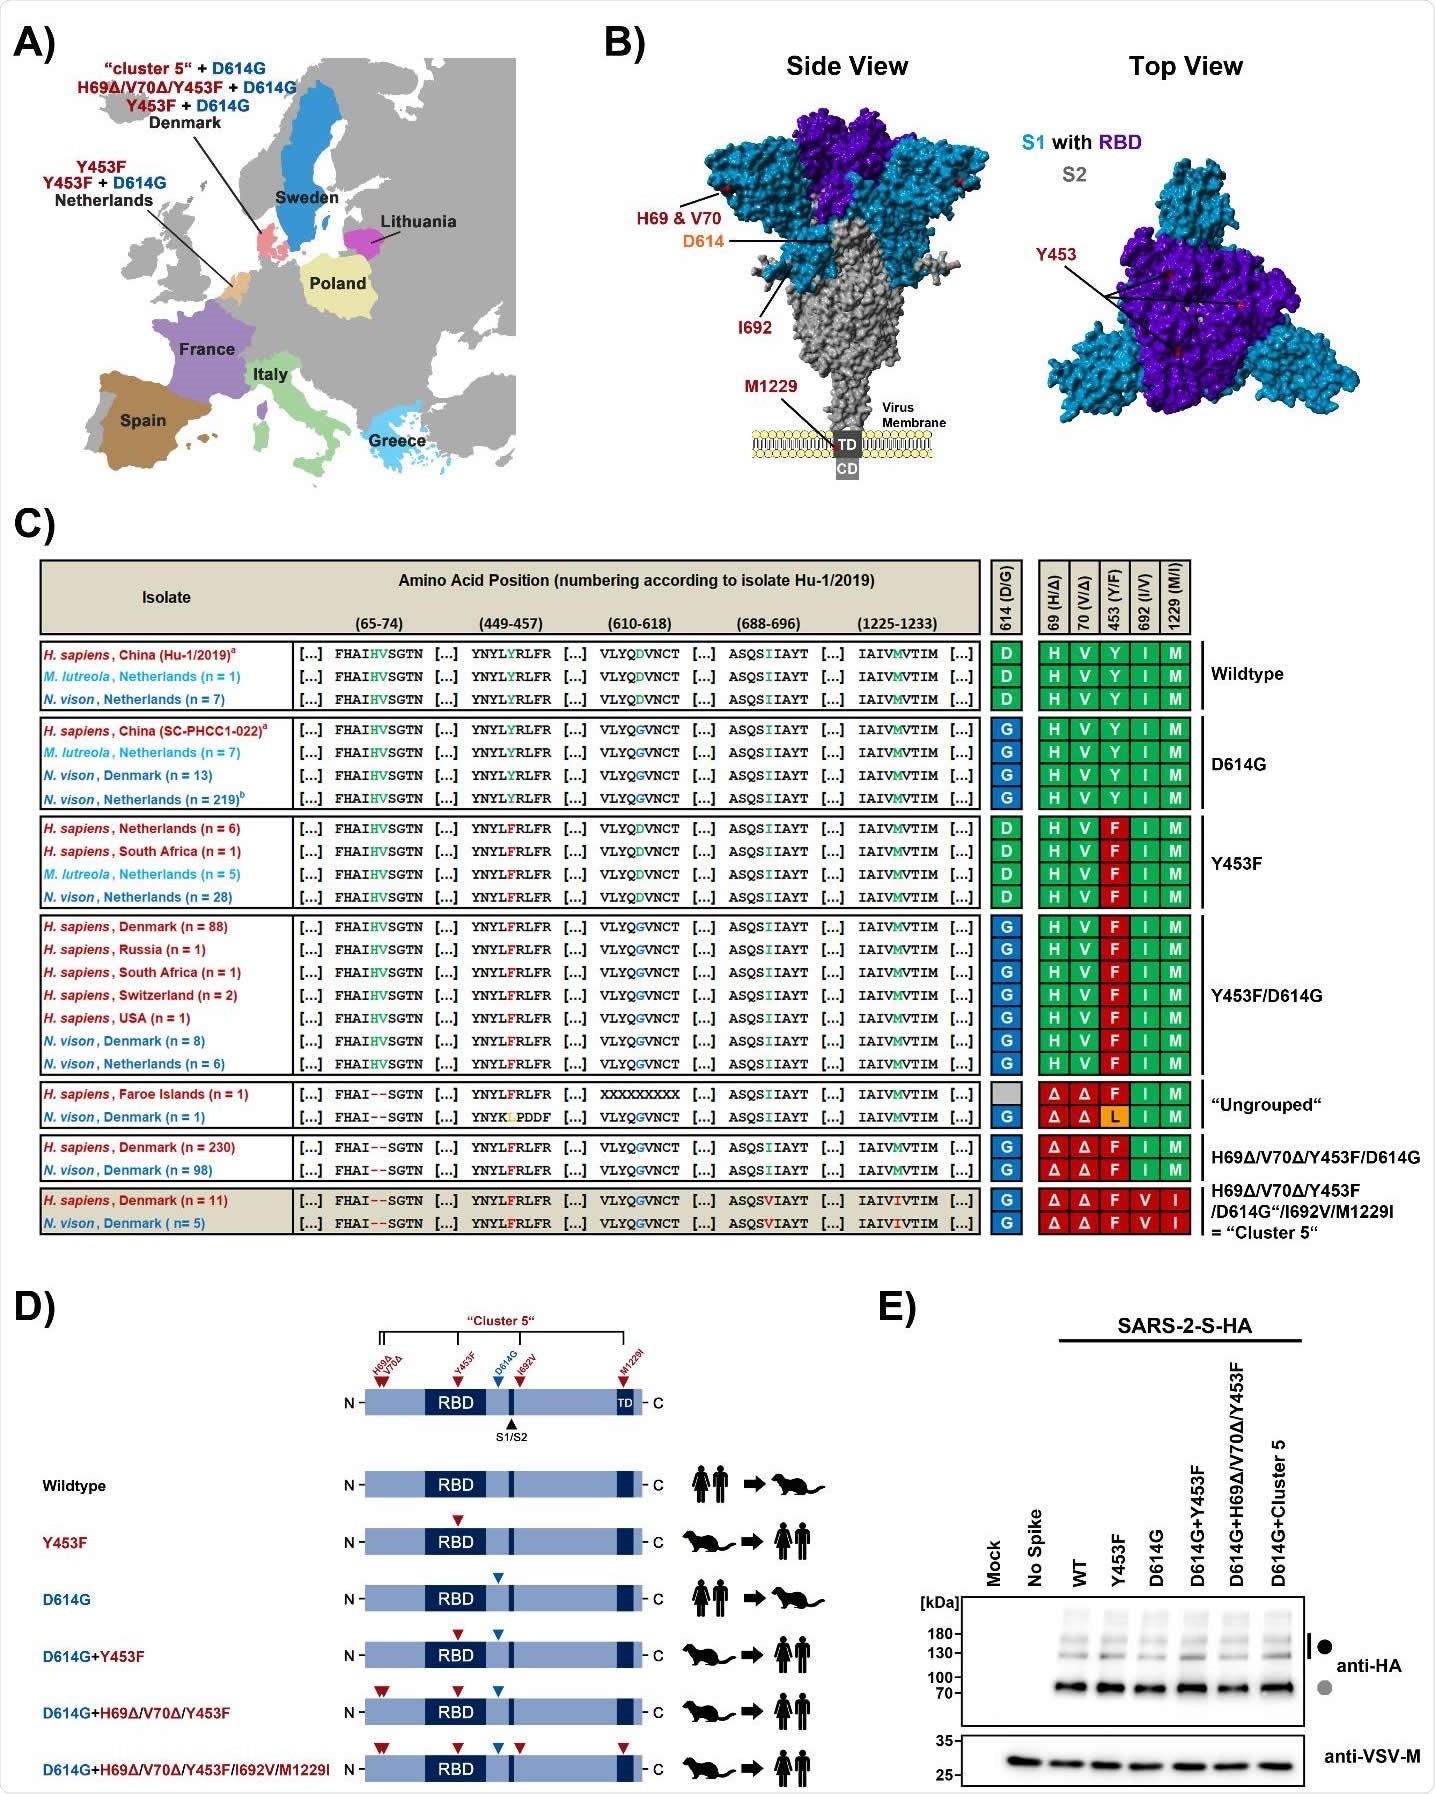 Mink-specific spike protein variants are robustly expressed, proteolytically processed and incorporated into viral particles. (A) European countries that have reported SARS-CoV-2 infection in mink. The mink-specific spike (S) protein mutations under study are highlighted. (B) Summary of mink-specific S protein mutations found in human and mink SARS-CoV-2 isolates. Sequences were retrieved from the GISAID (global initiative on sharing all influenza data) database. Legend: a = reference sequences, b = 36/219 sequences carry additional L452M mutation; Abbreviations: H. sapiens = Homo sapiens (Human), N. vison = Neovison vison (American Mink), M. lutreola = Mustela lutreola (European Mink). (C) Location of the mink-specific S protein mutations in the context of the 3-dimensional structure of the S protein. (D) Schematic illustration of the S protein variants under study and their transmission history. Abbreviations: RBD = receptor binding domain, S1/S2 = border between the S1 and S2 subunits, TD = transmembrane domain. (E) Rhabdoviral pseudotypes bearing the indicated S protein variants (equipped with a C-terminal HA-epitope tag) or no viral glycoprotein were subjected to SDS-PAGE under reducing conditions and immunoblot in order to investigate S protein processing and particle incorporation. Detection of vesicular stomatitis virus matrix protein (VSV-M) served as loading control. Black and grey circles indicate bands for unprocessed and processed (cleavage at S1/S2 site) S proteins, respectively. Similar results were obtained in four separate experiments.